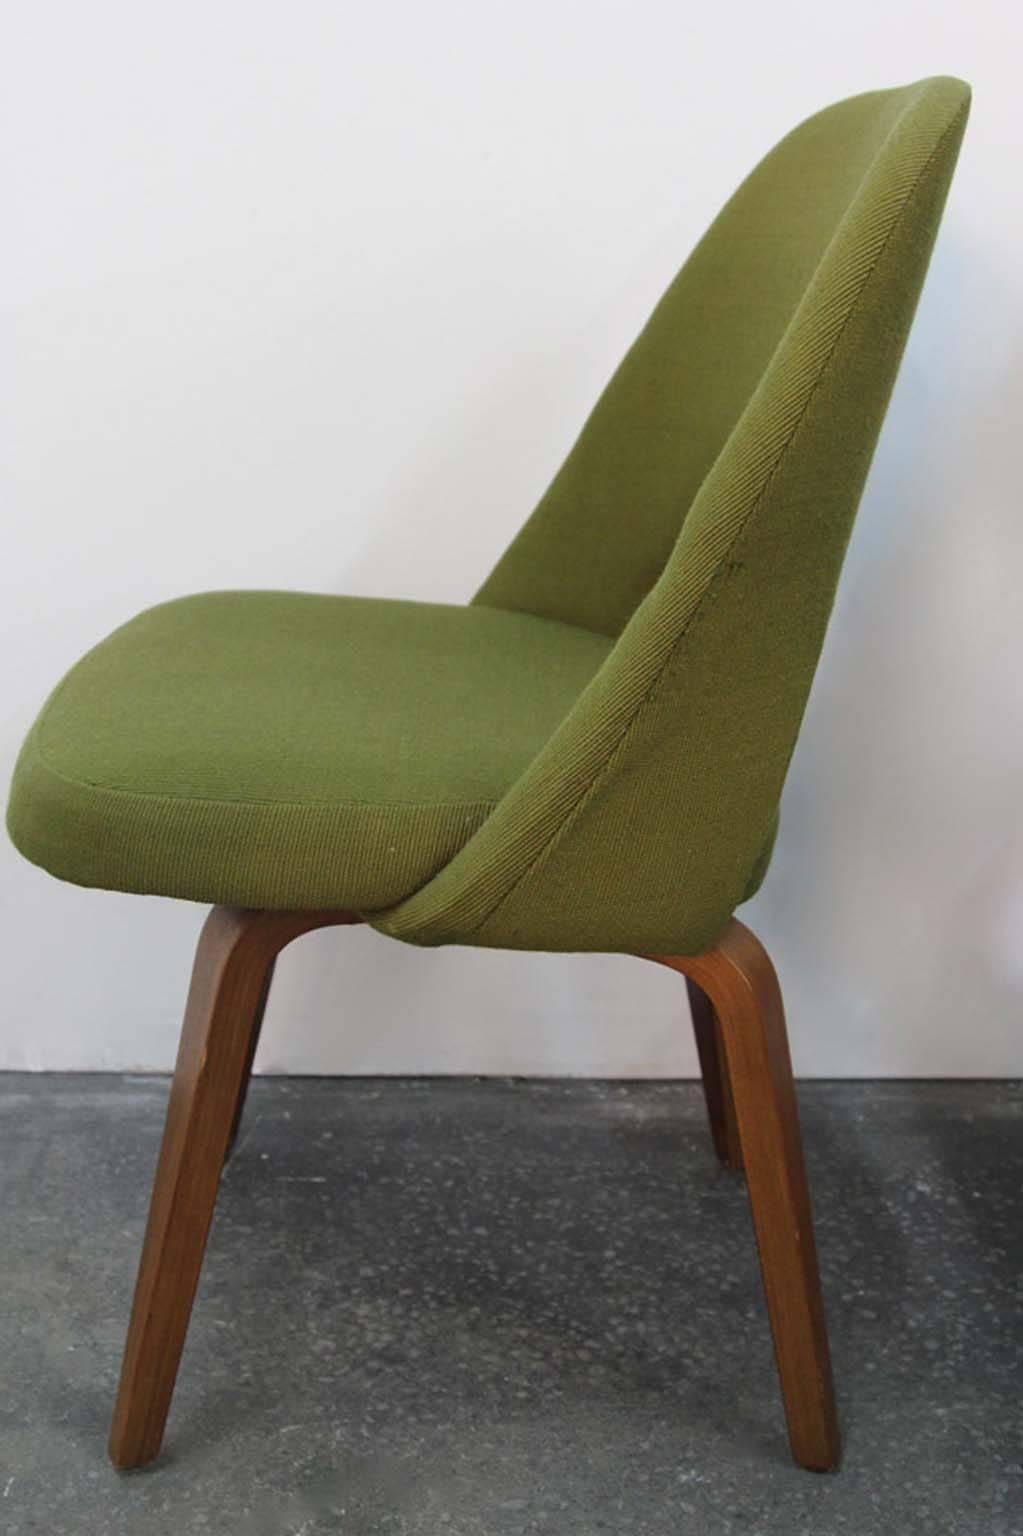 Amazing and rare original set of Eero Saarinen for Knoll Executive side chairs. Not with the common steel legs, but rather with the rare walnut legs. With original labels. Chairs are in ok condition as is, upholstery could use a cleaning and the